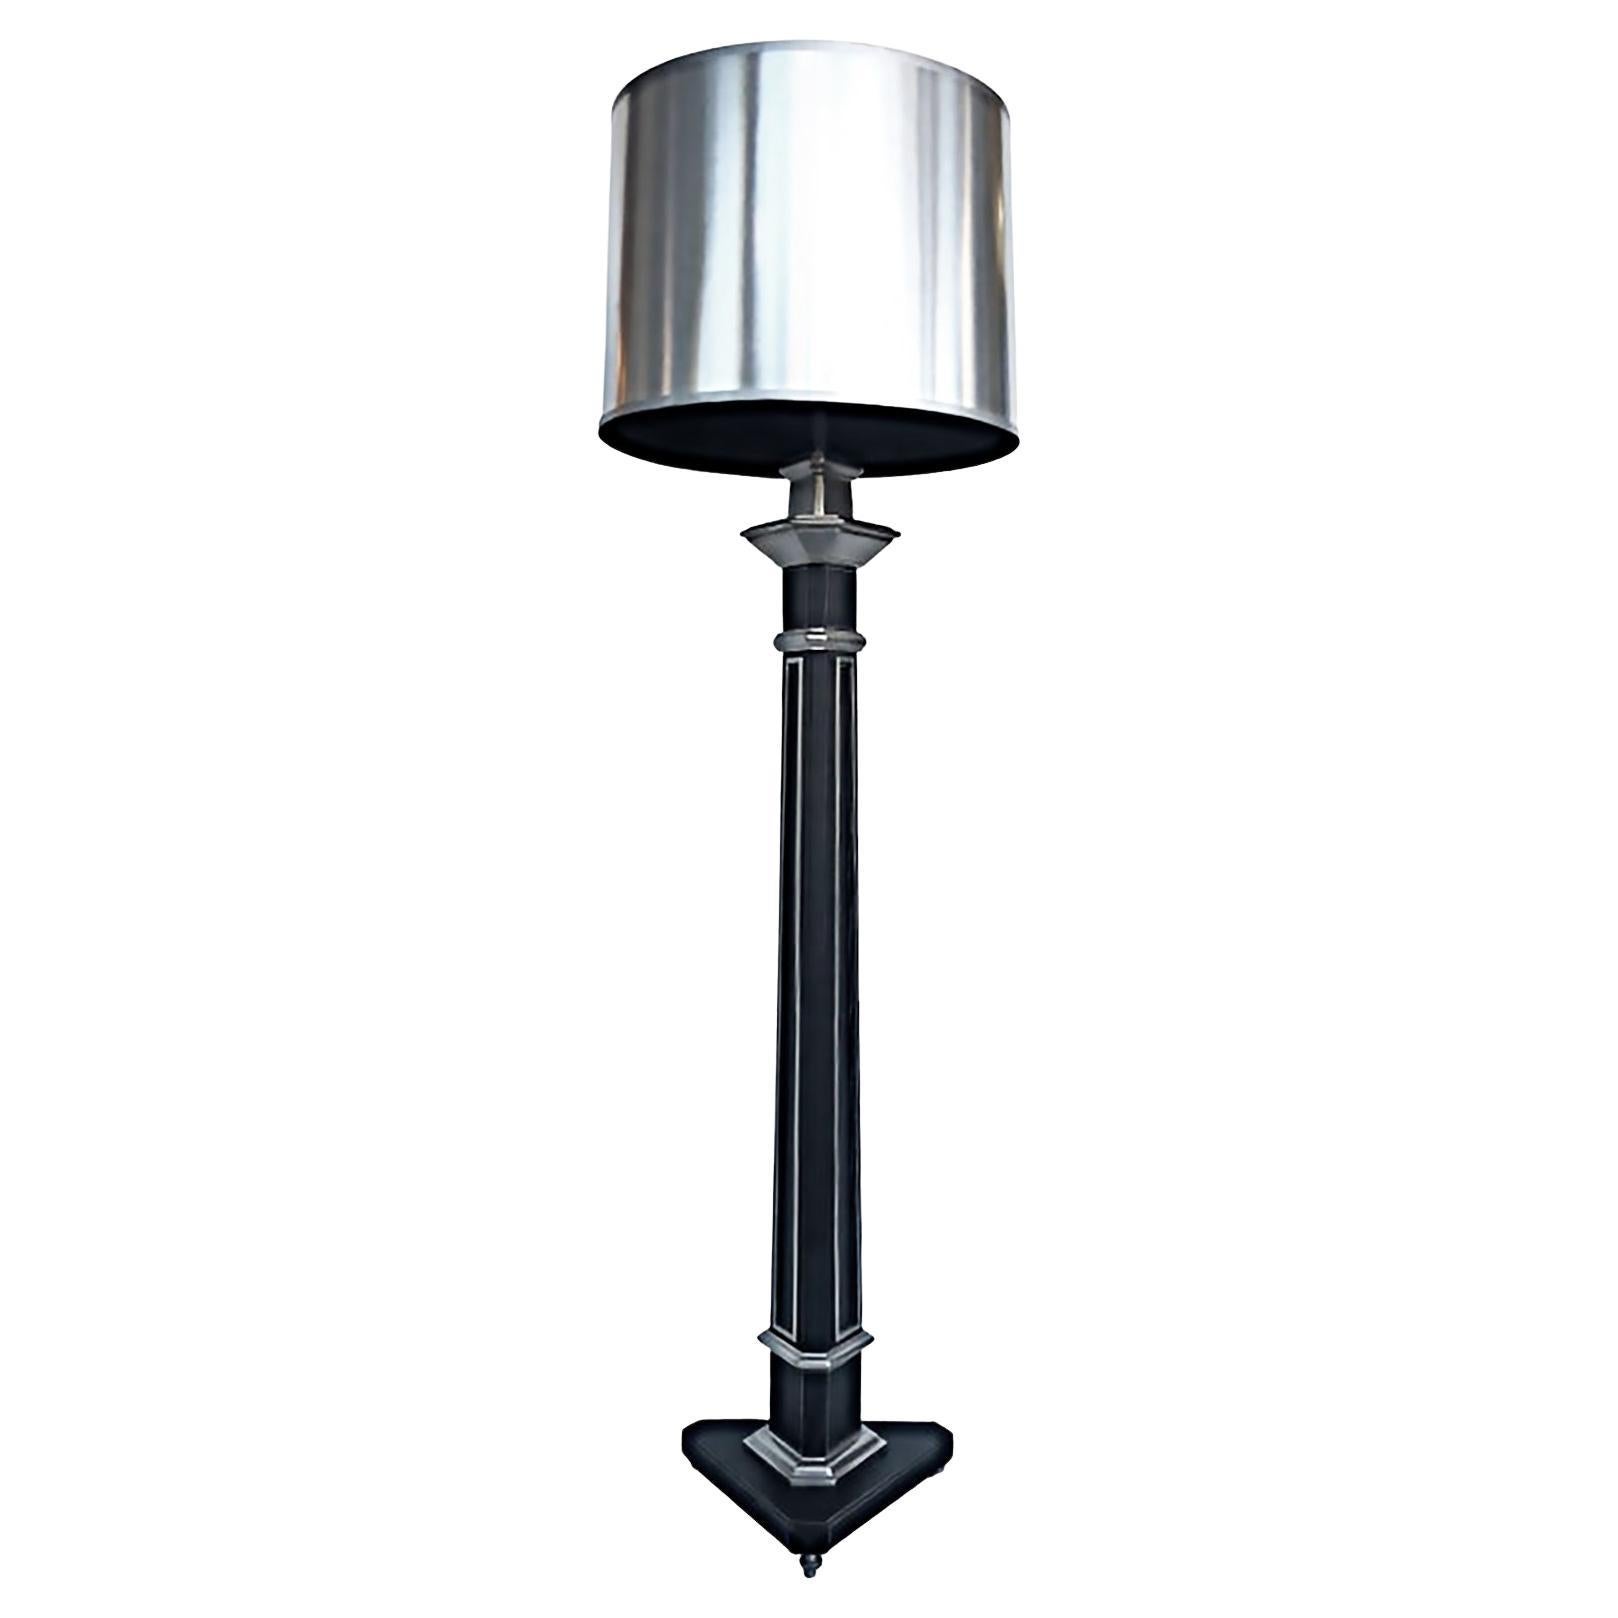 Neoclassical Style Stitched Leather Floor Lamp, Nickel-Plated Steel Footed Base